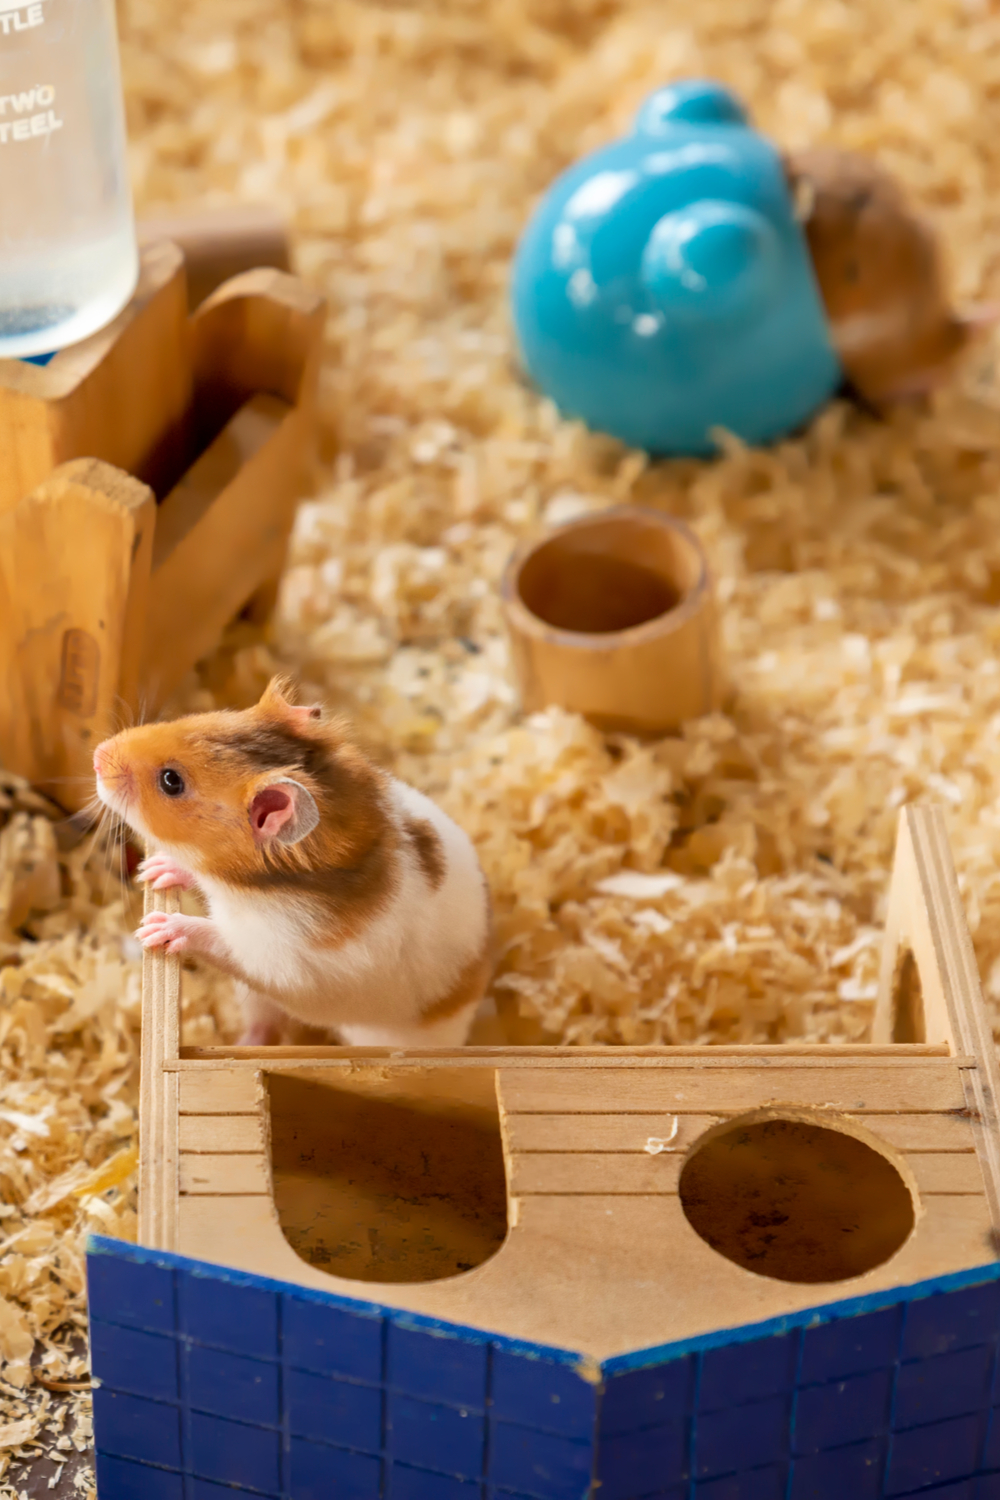 How to know if a hamster is pregnant